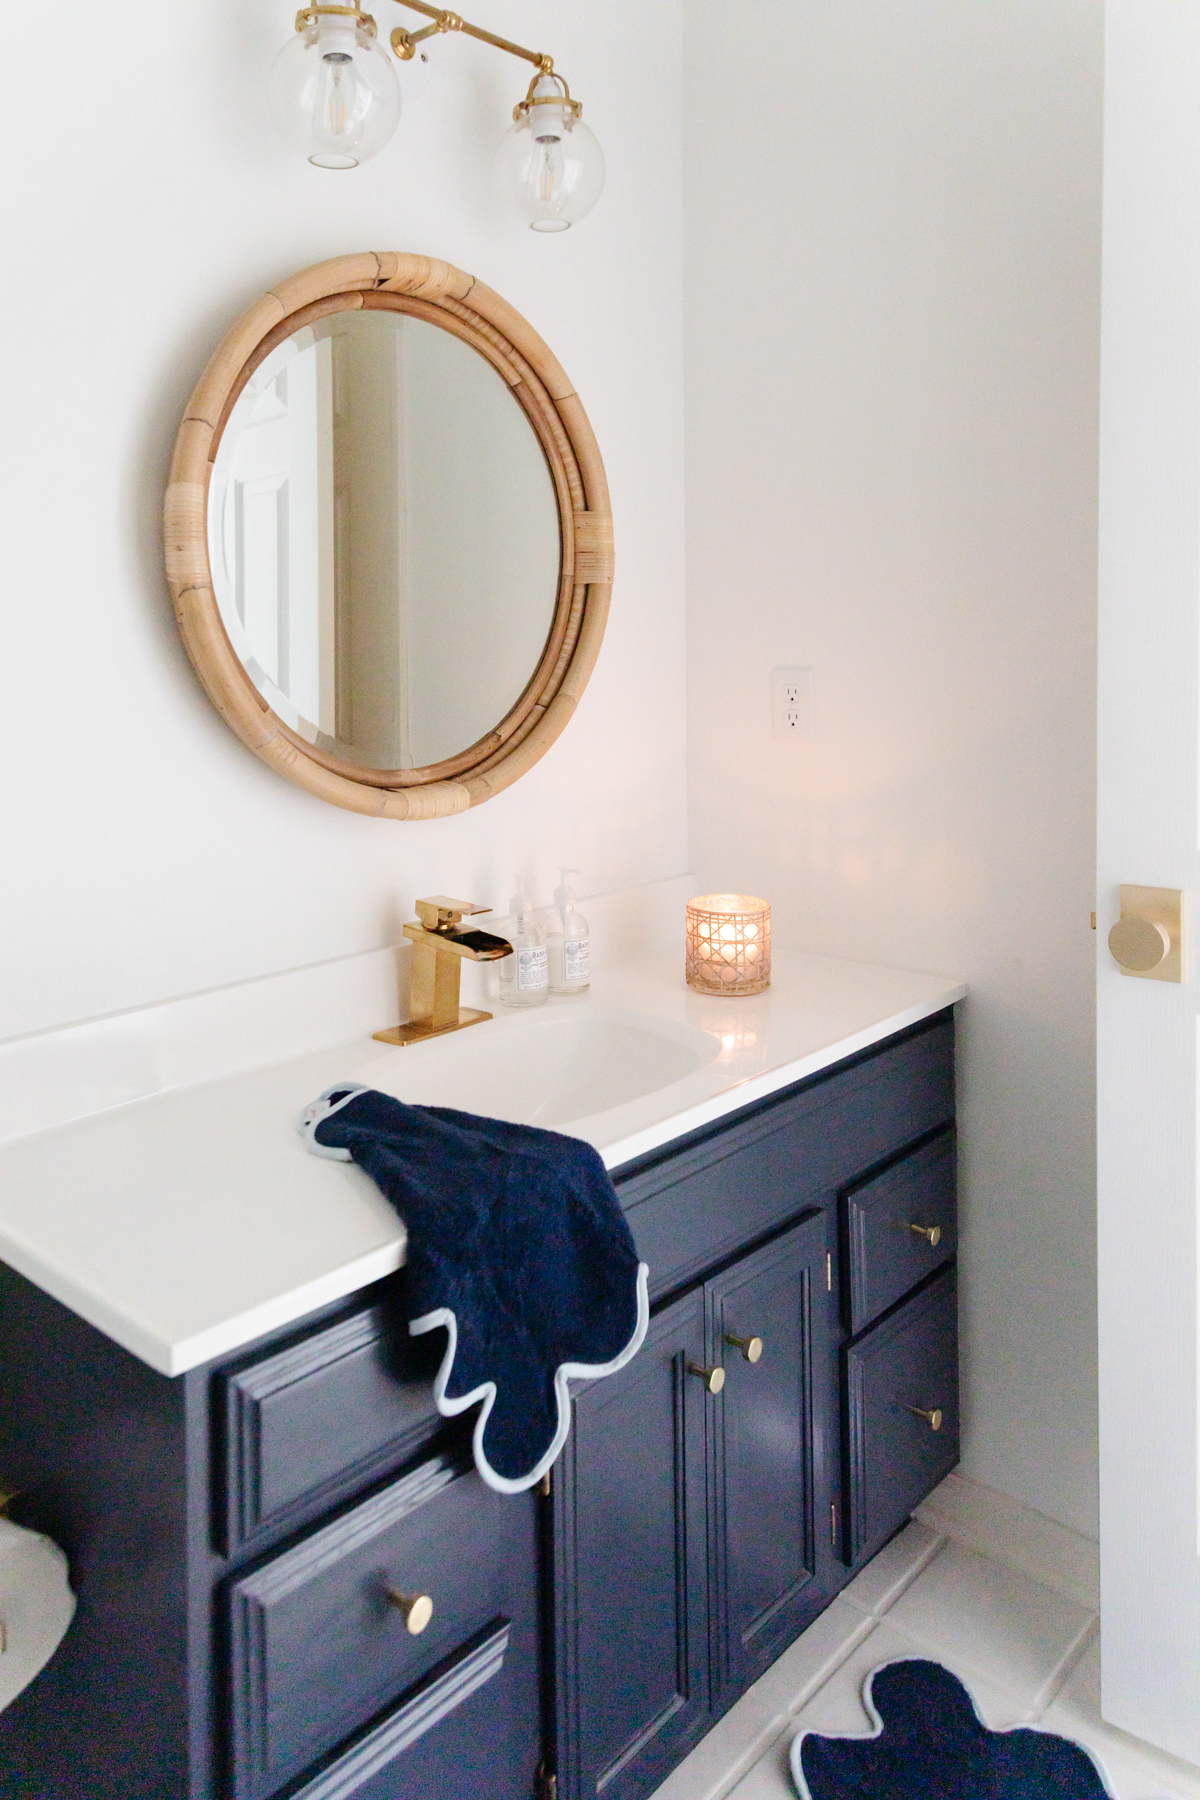 A nautical-themed bathroom with a blue rug and a round mirror.